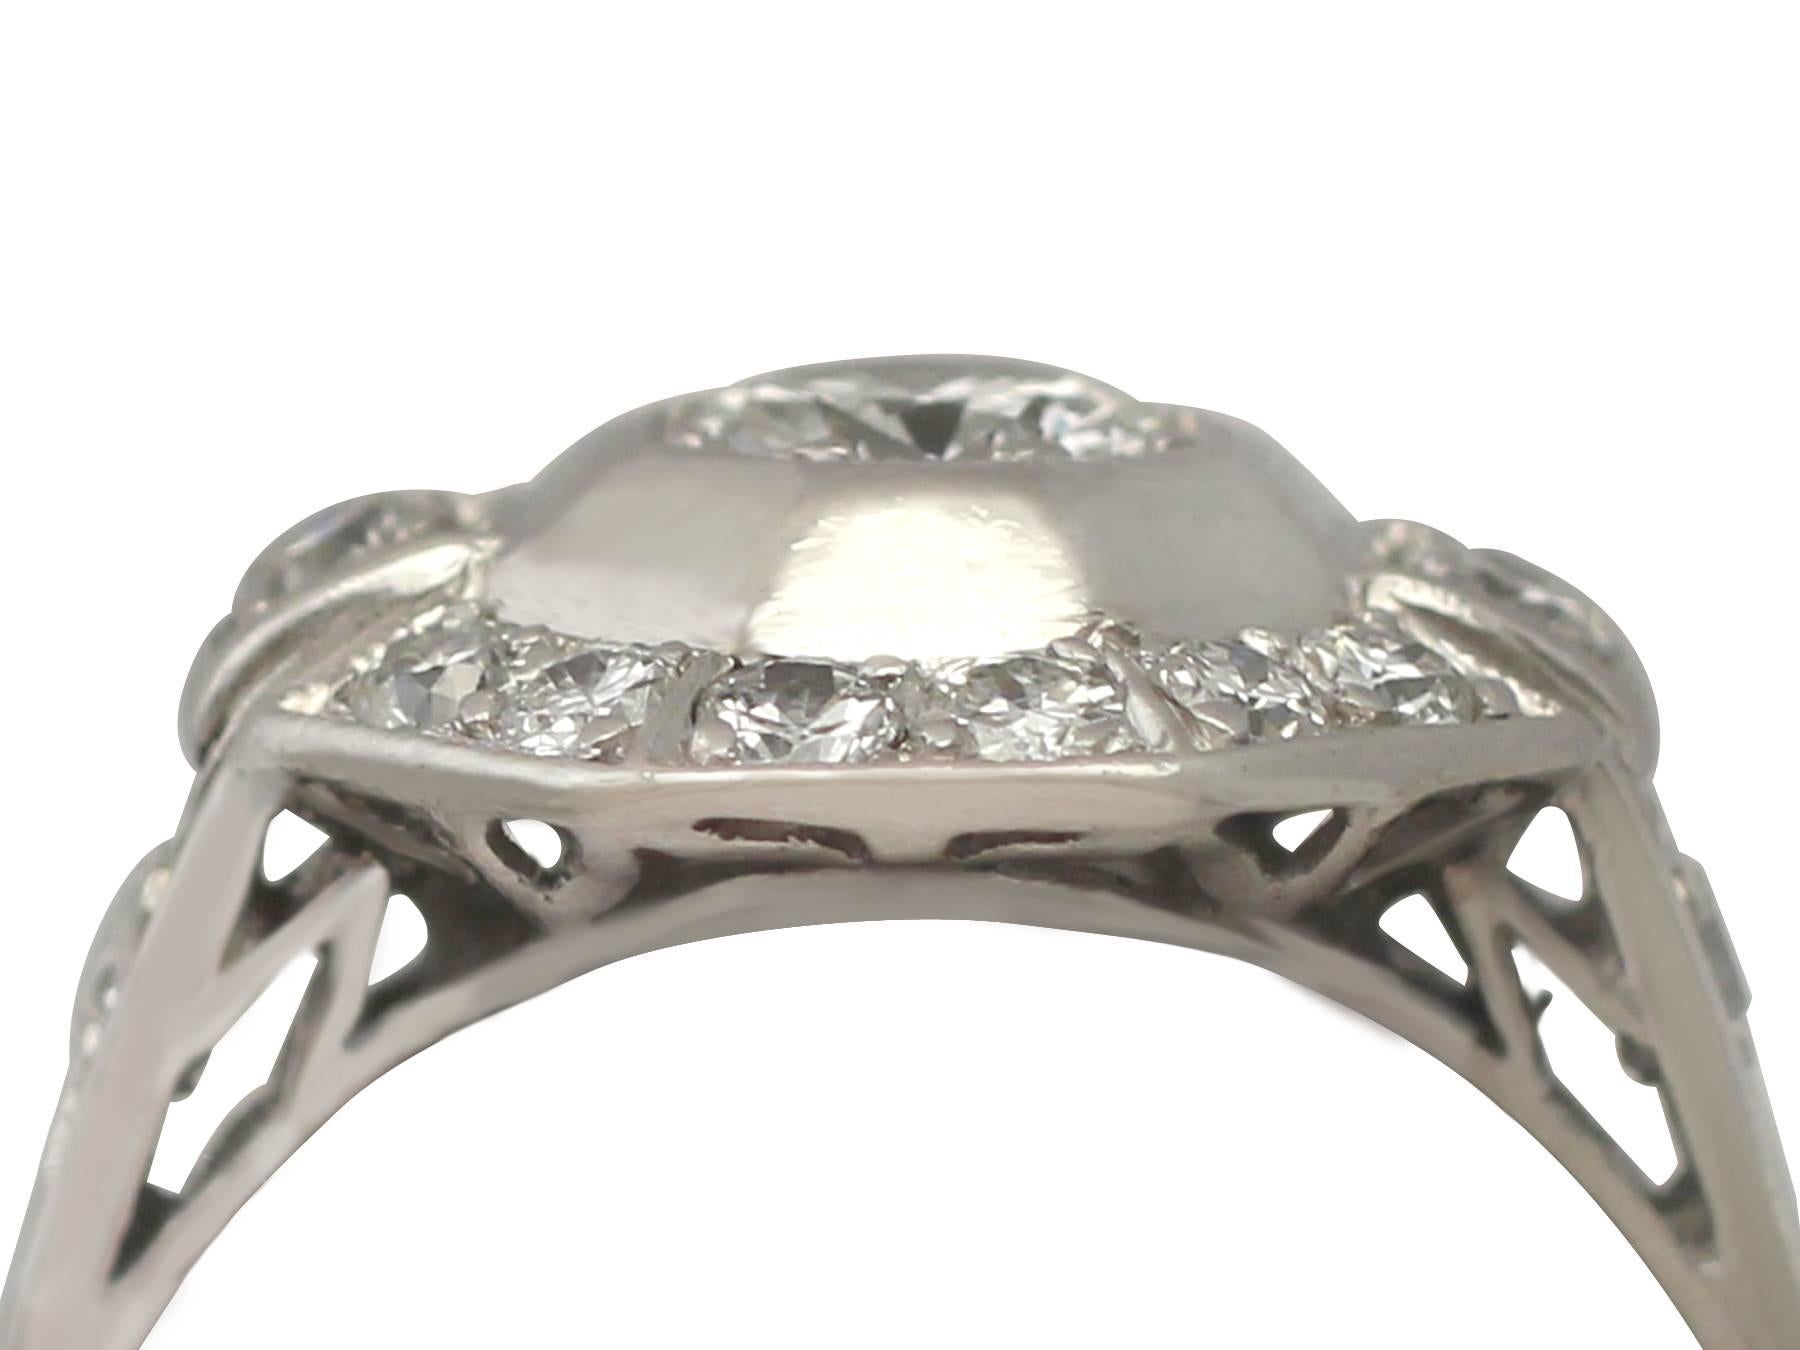 A fine and impressive vintage 0.94 carat diamond (total) and platinum dress ring in the Art Deco style; part of our diverse vintage jewellery and estate jewelry collections

This fine and impressive octagon shaped diamond ring has been crafted in